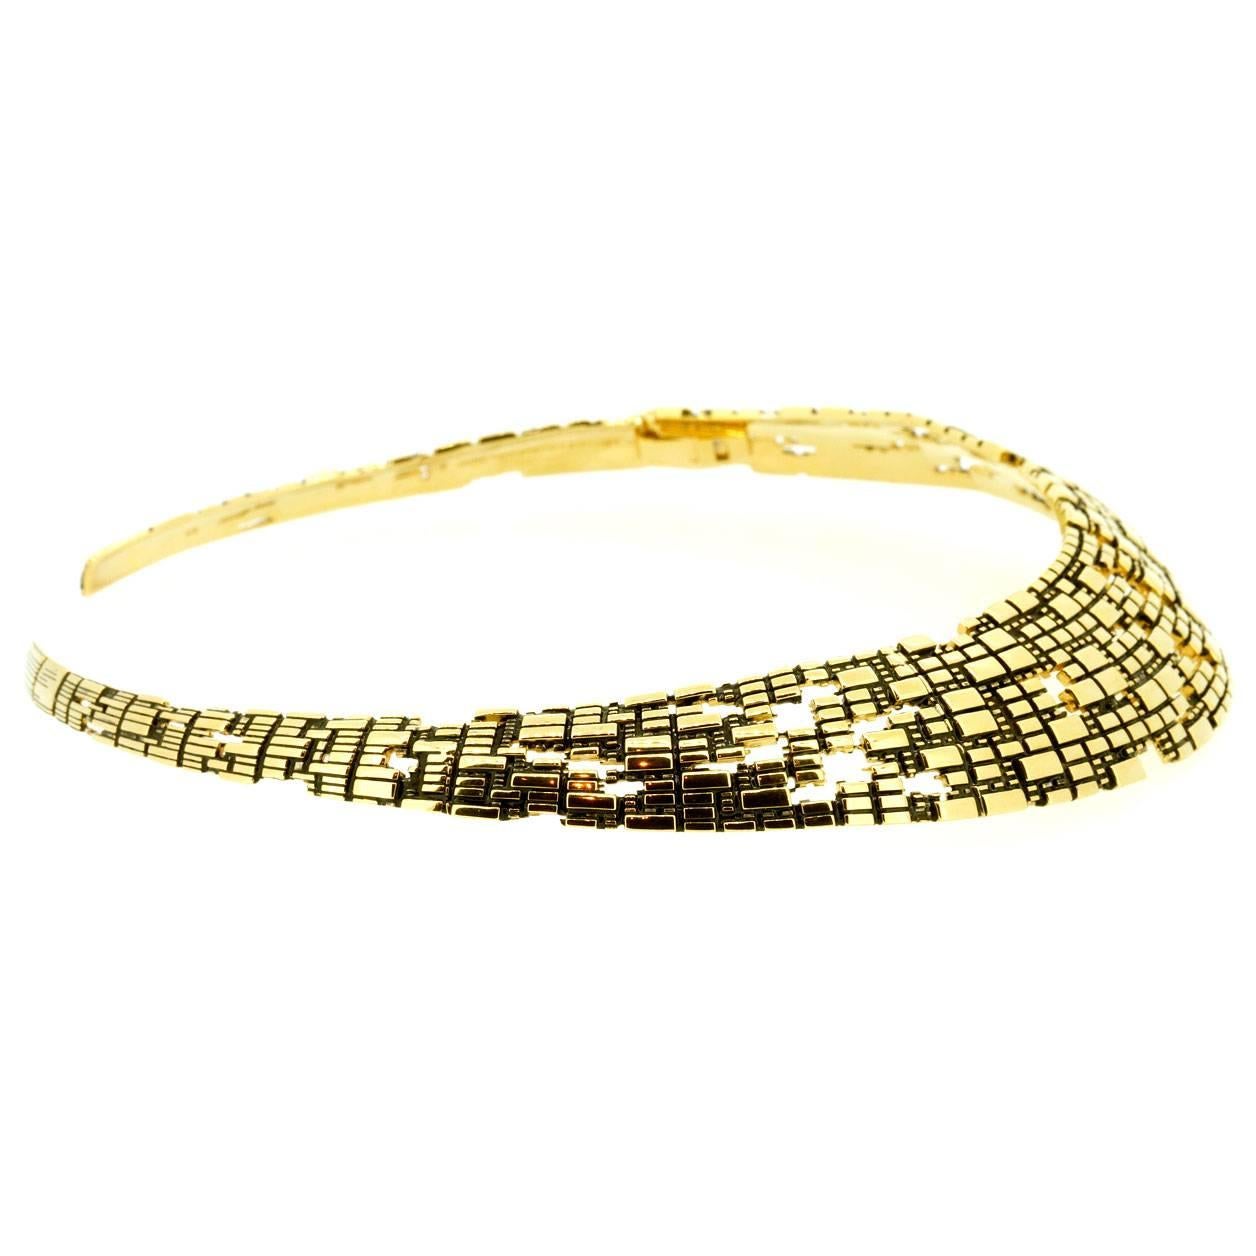 This fractal cubic collar by John Brevard is inspired by the Bitcoin blockchain and designed using a parametric modeling tool. This elaborate 18k yellow gold collar is made for the 21st century technology-forward woman. Also available with 40